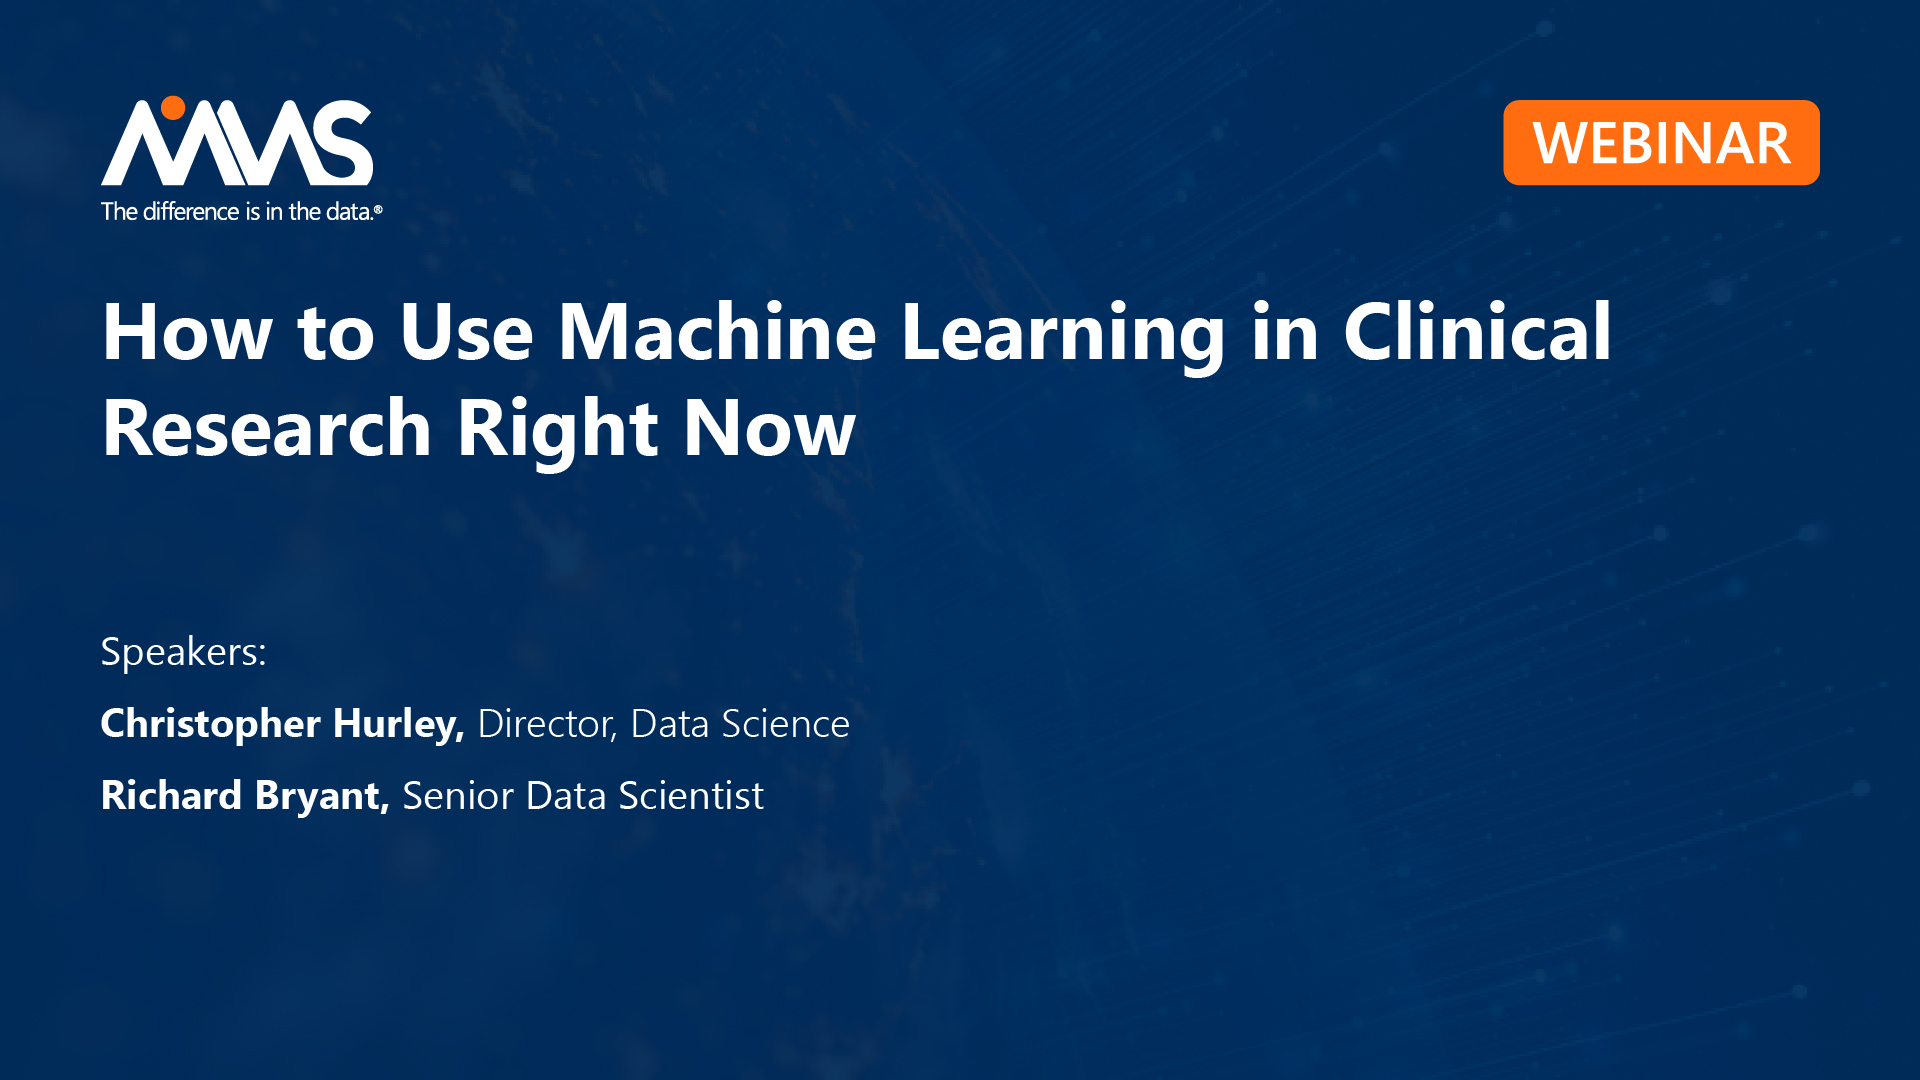 How to Use Machine Learning in Clinical Research Right Now